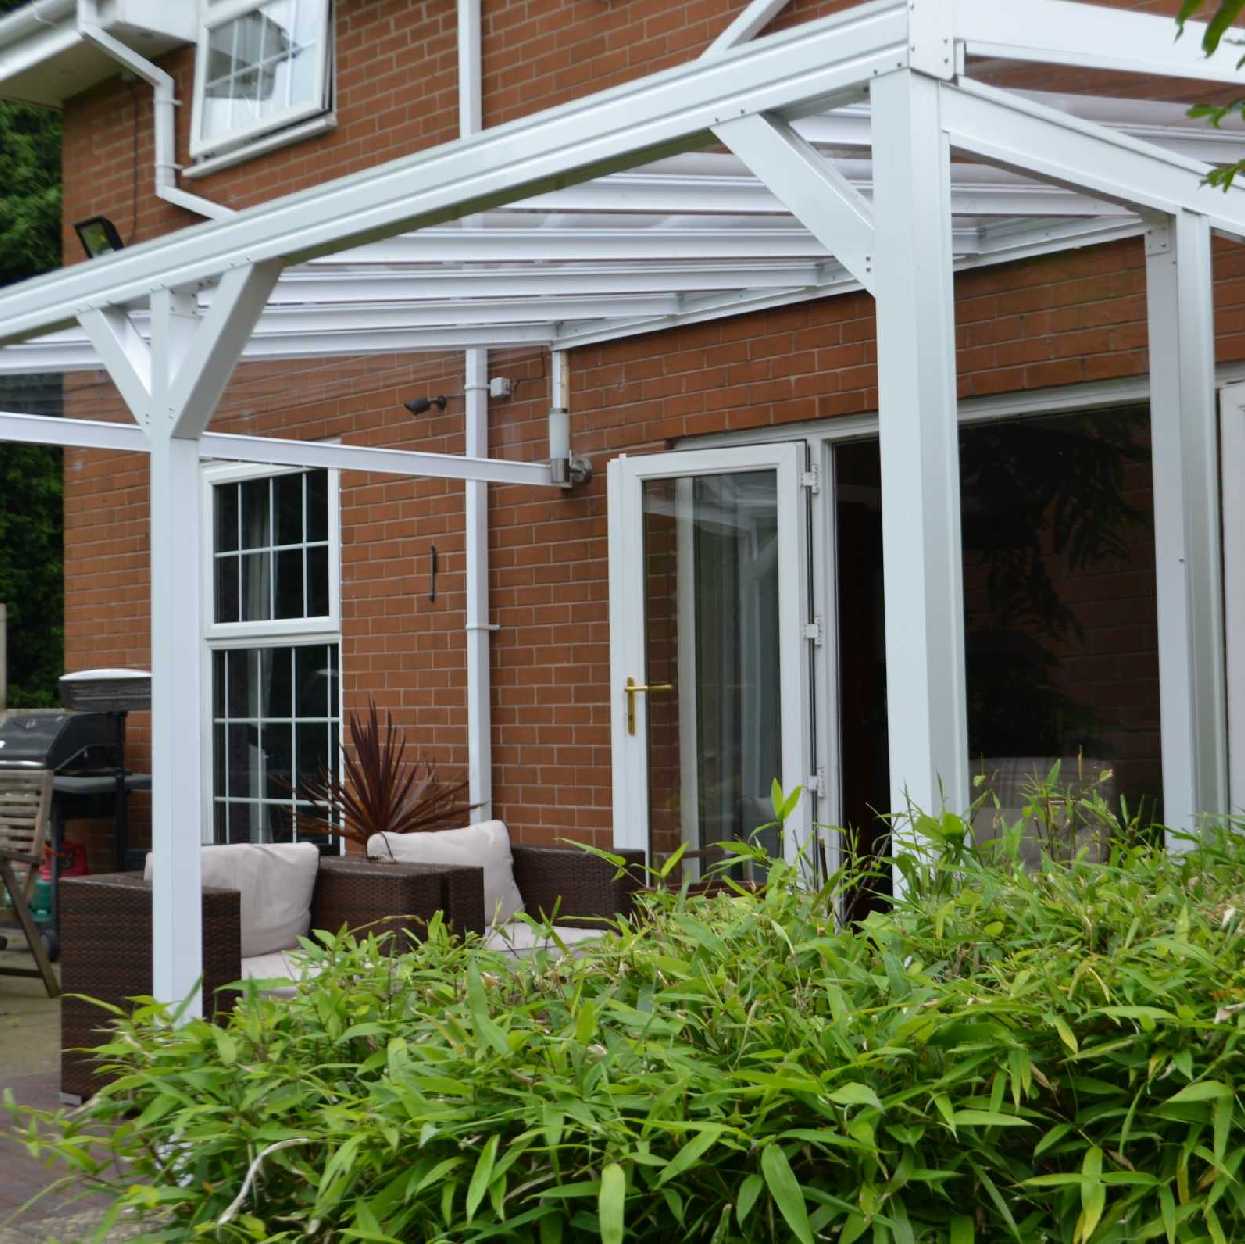 Omega Smart Lean-To Canopy, White with 6mm Glass Clear Plate Polycarbonate Glazing - 10.0m (W) x 4.0m (P), (5) Supporting Posts from Omega Build